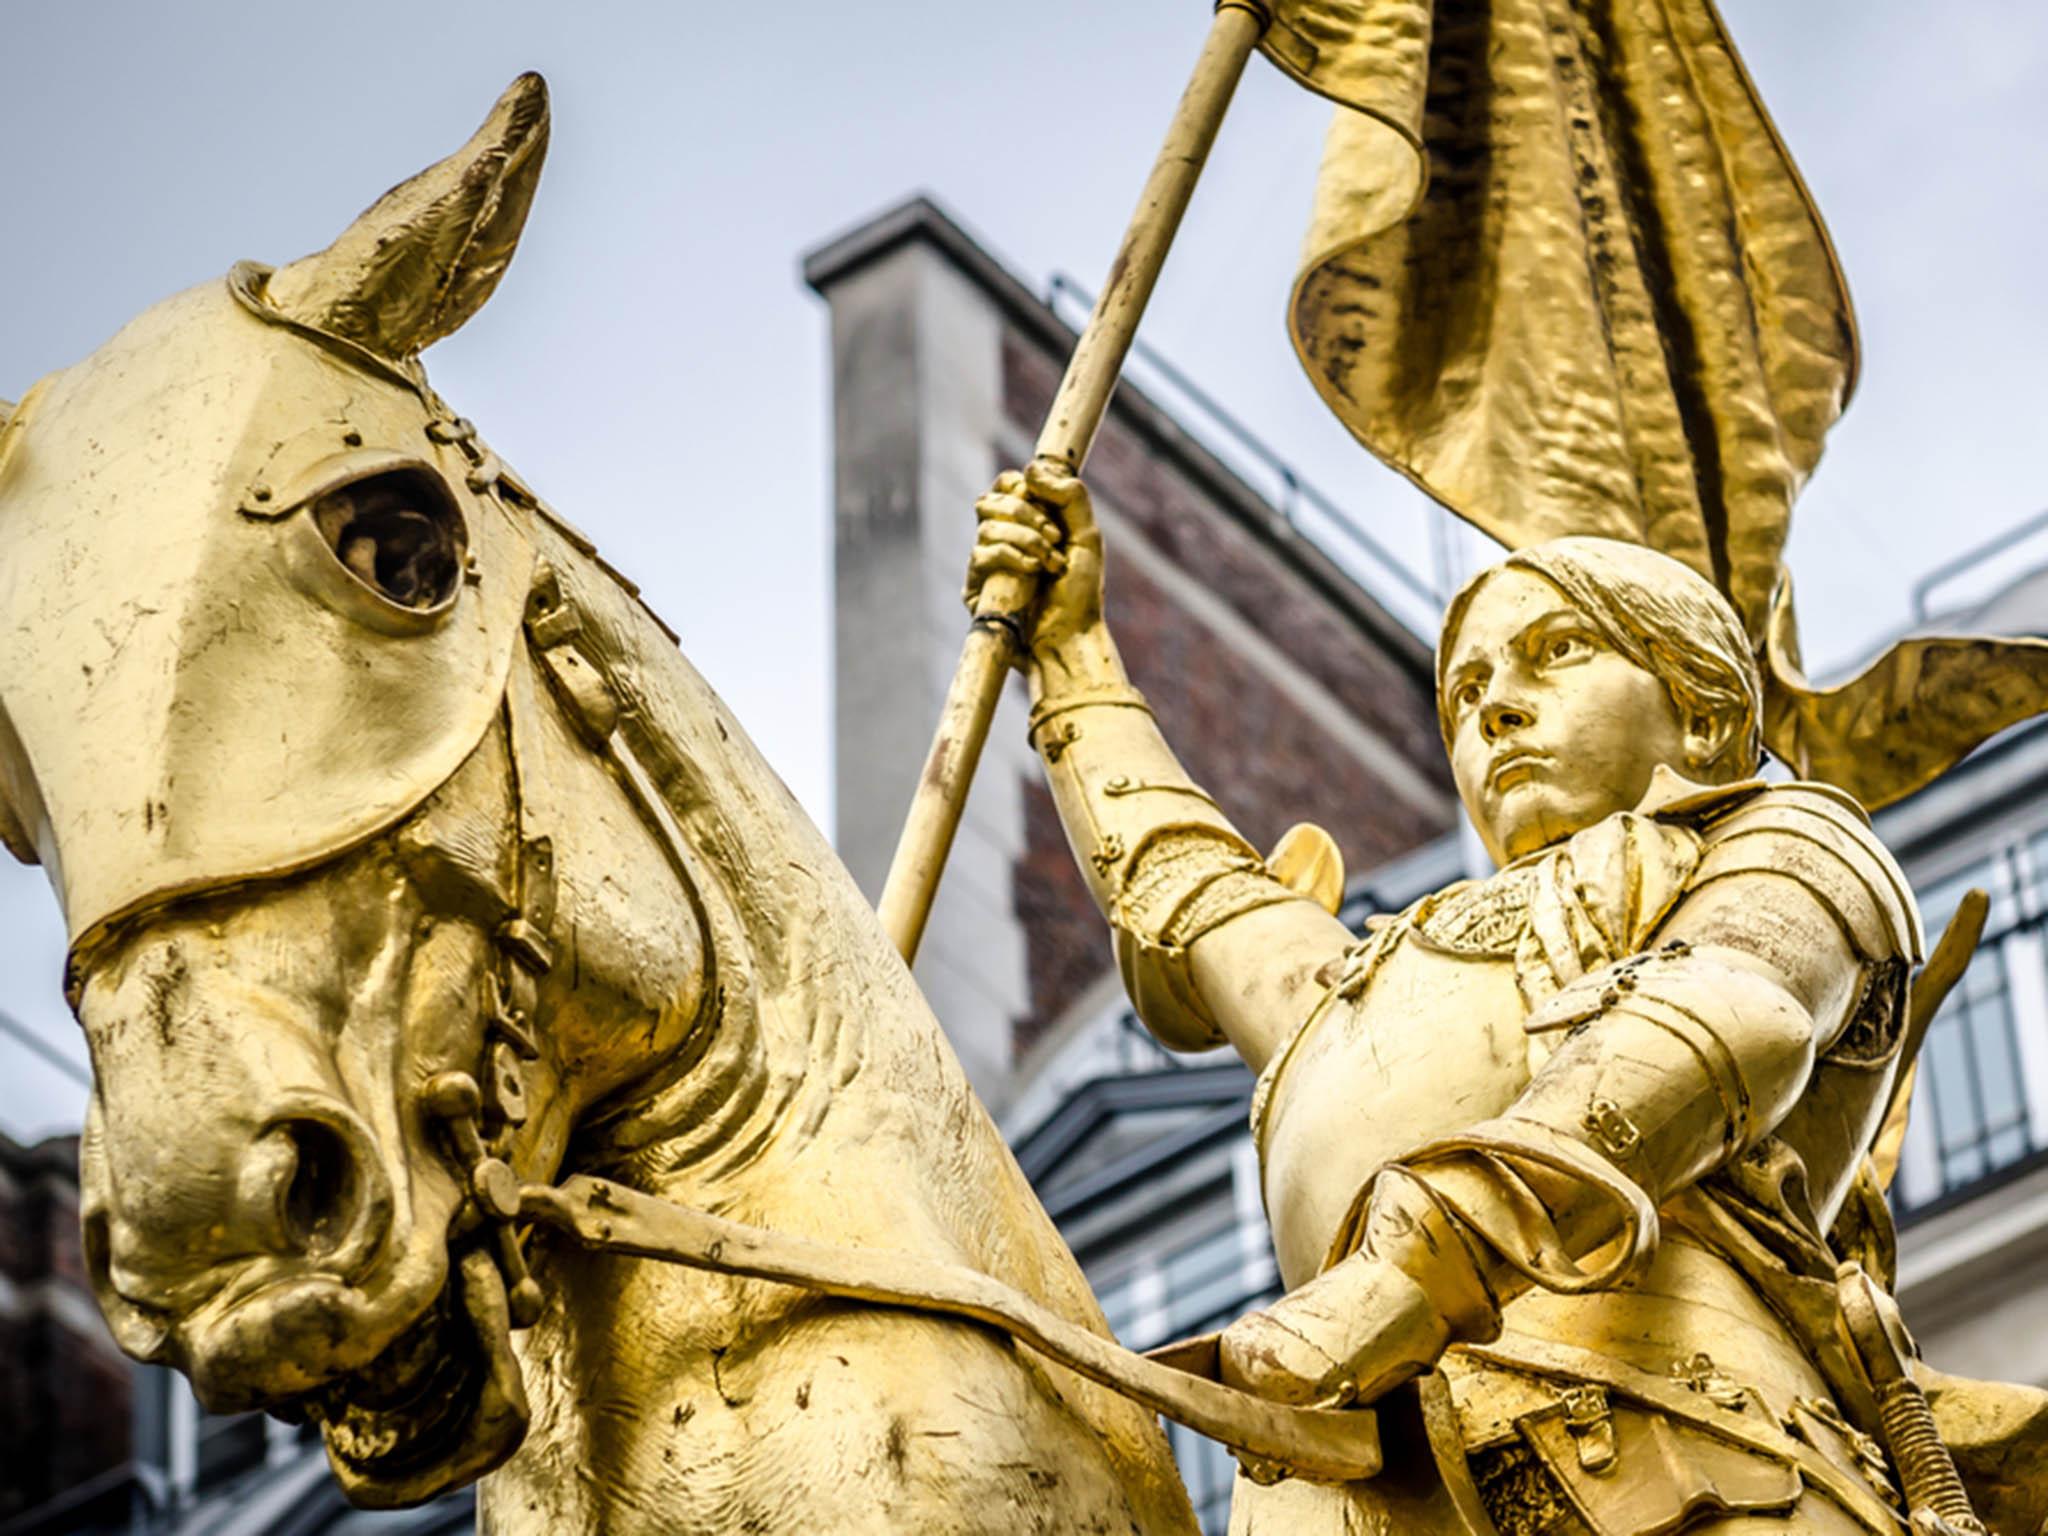 Joan of Arc, whose statue stands in Paris, led an army to victory dressed as a soldier during the Hundred Years War when women were not supposed to fight